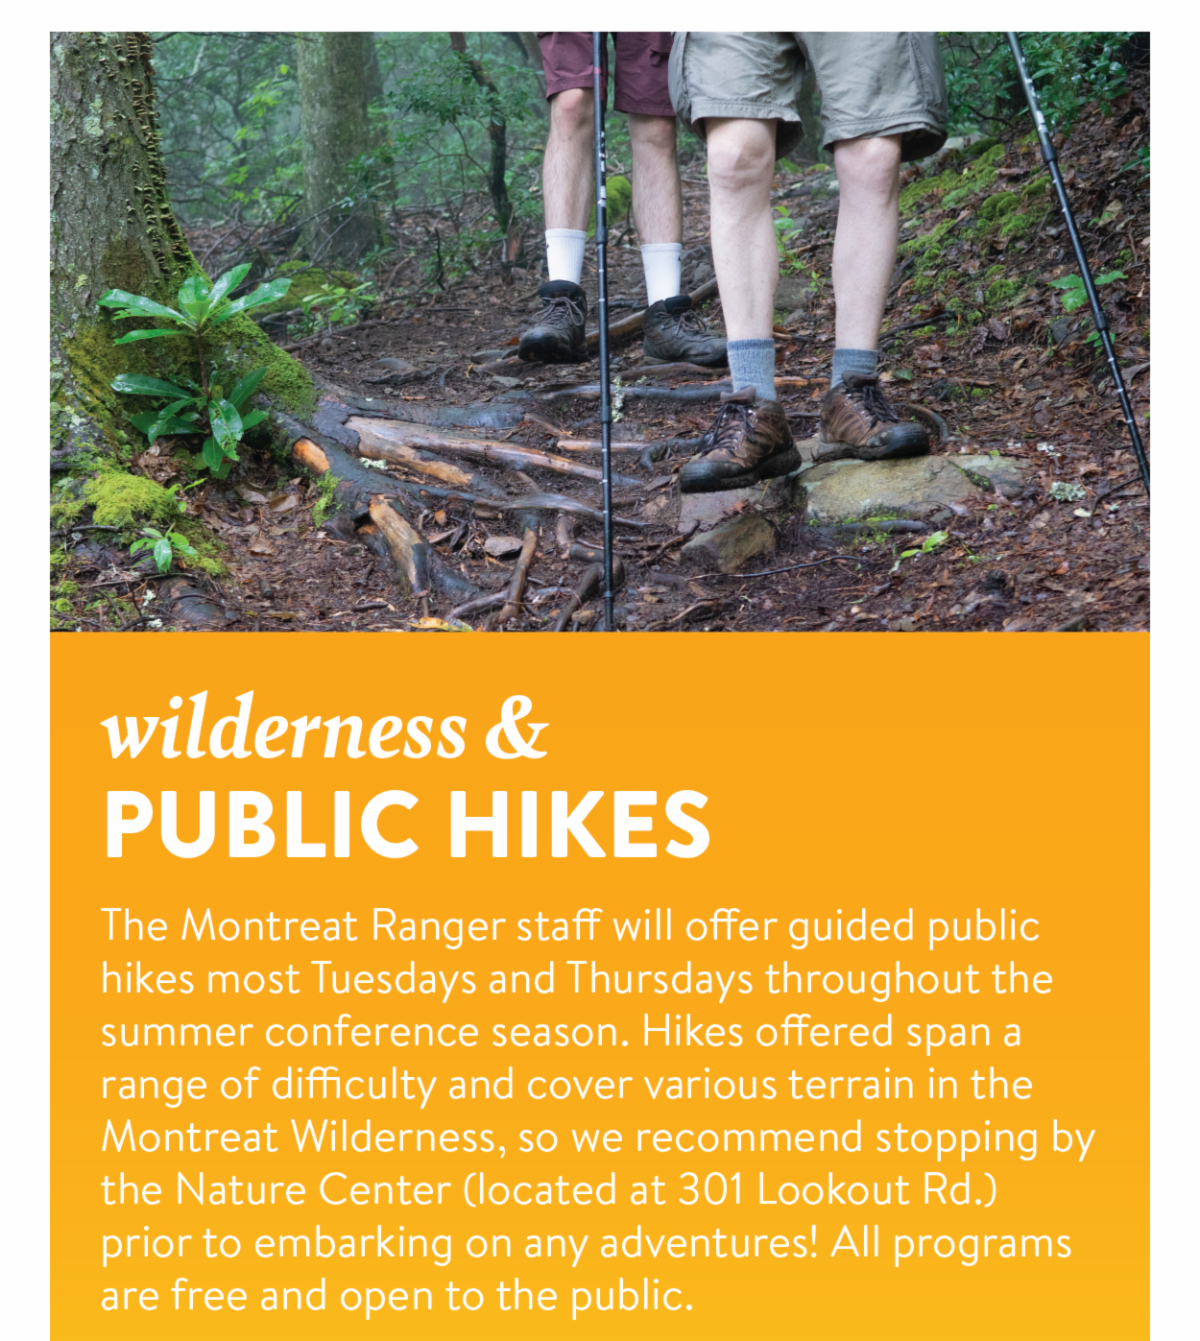 Wilderness & Public Hikes - The Montreat Ranger staff will offer guided public hikes most Tuesdays and Thursdays throughout the summer conference season. Hikes offered span a range of difficulty and cover various terrain in the Montreat Wilderness, so we recommend stopping by the Nature Center (located at 301 Lookout Rd.) prior to embarking on any adventures! All programs are free and open to the public.